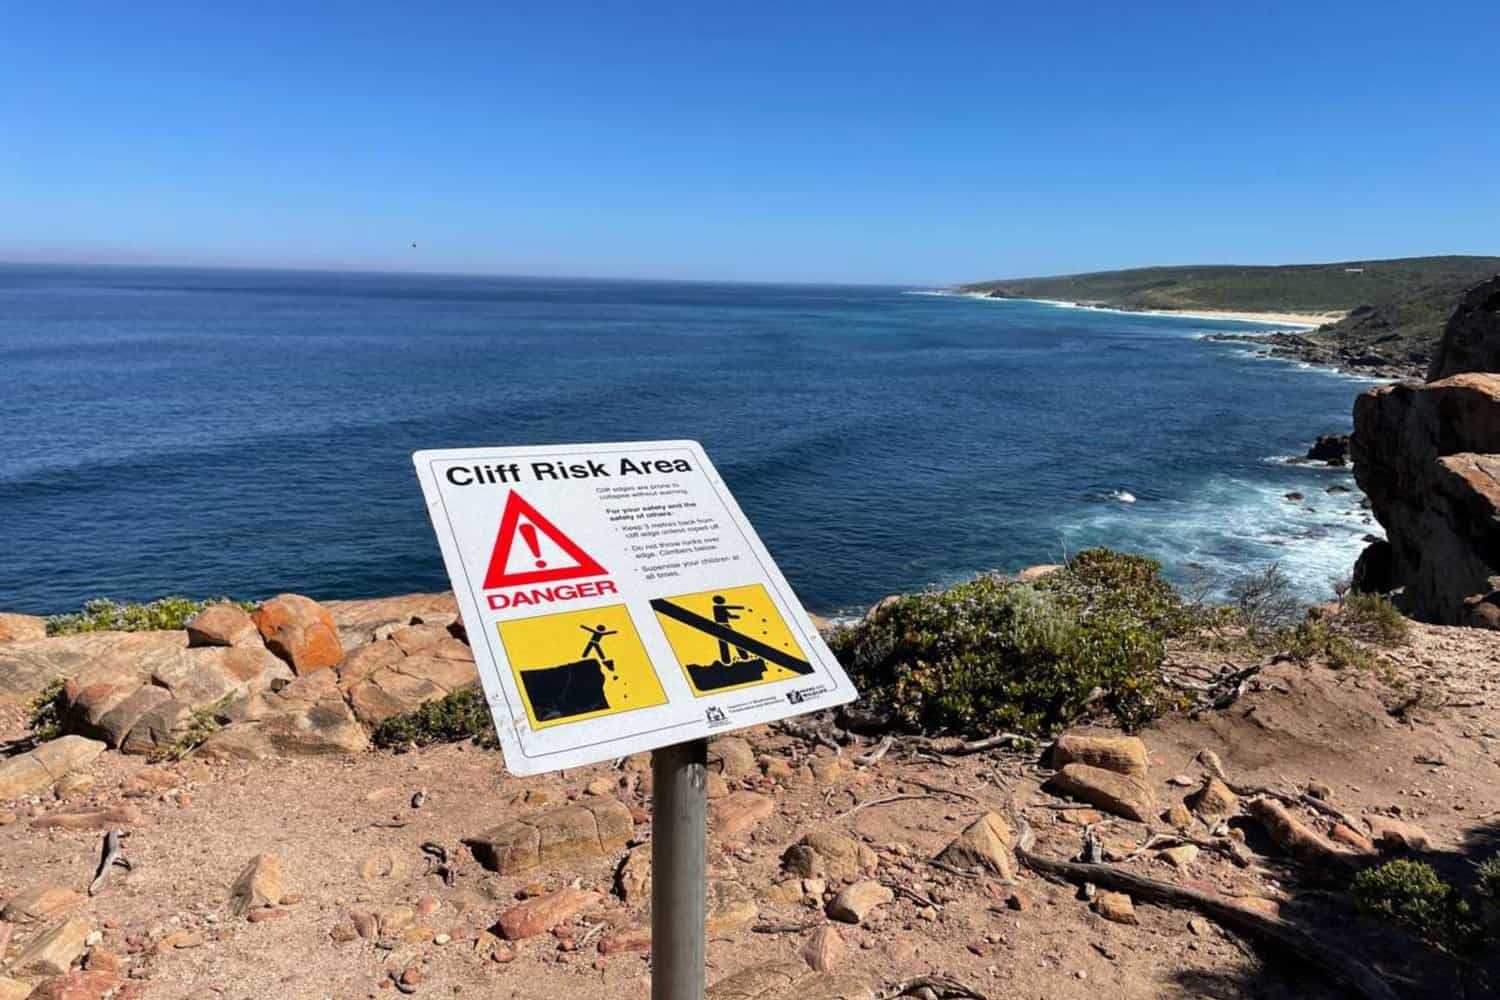 Warning sign indicating 'Cliff Risk Area' with symbols for danger ahead, positioned on the Wilyabrup sea cliffs with the Indian Ocean and coastline stretching into the distance.